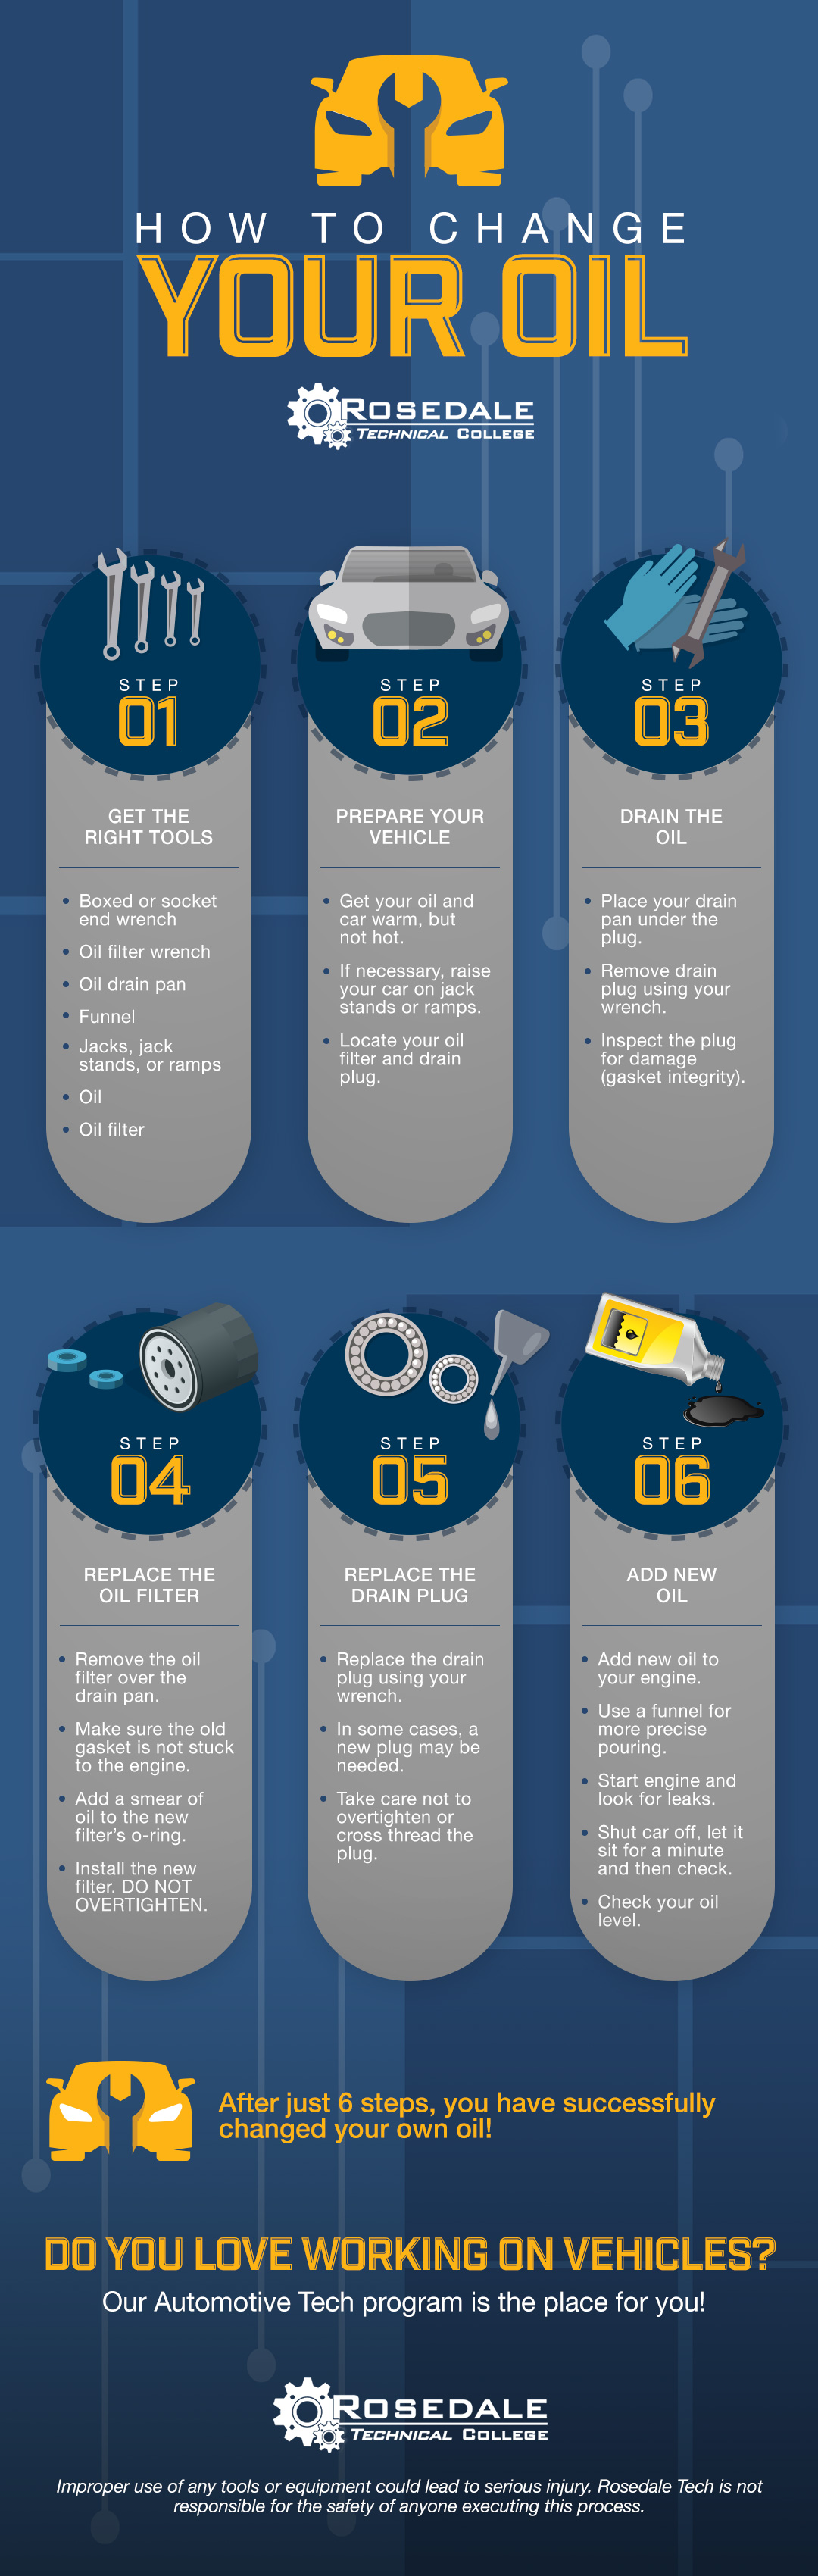 How To Change Oil Infographic 1 | Rosedale Technical College